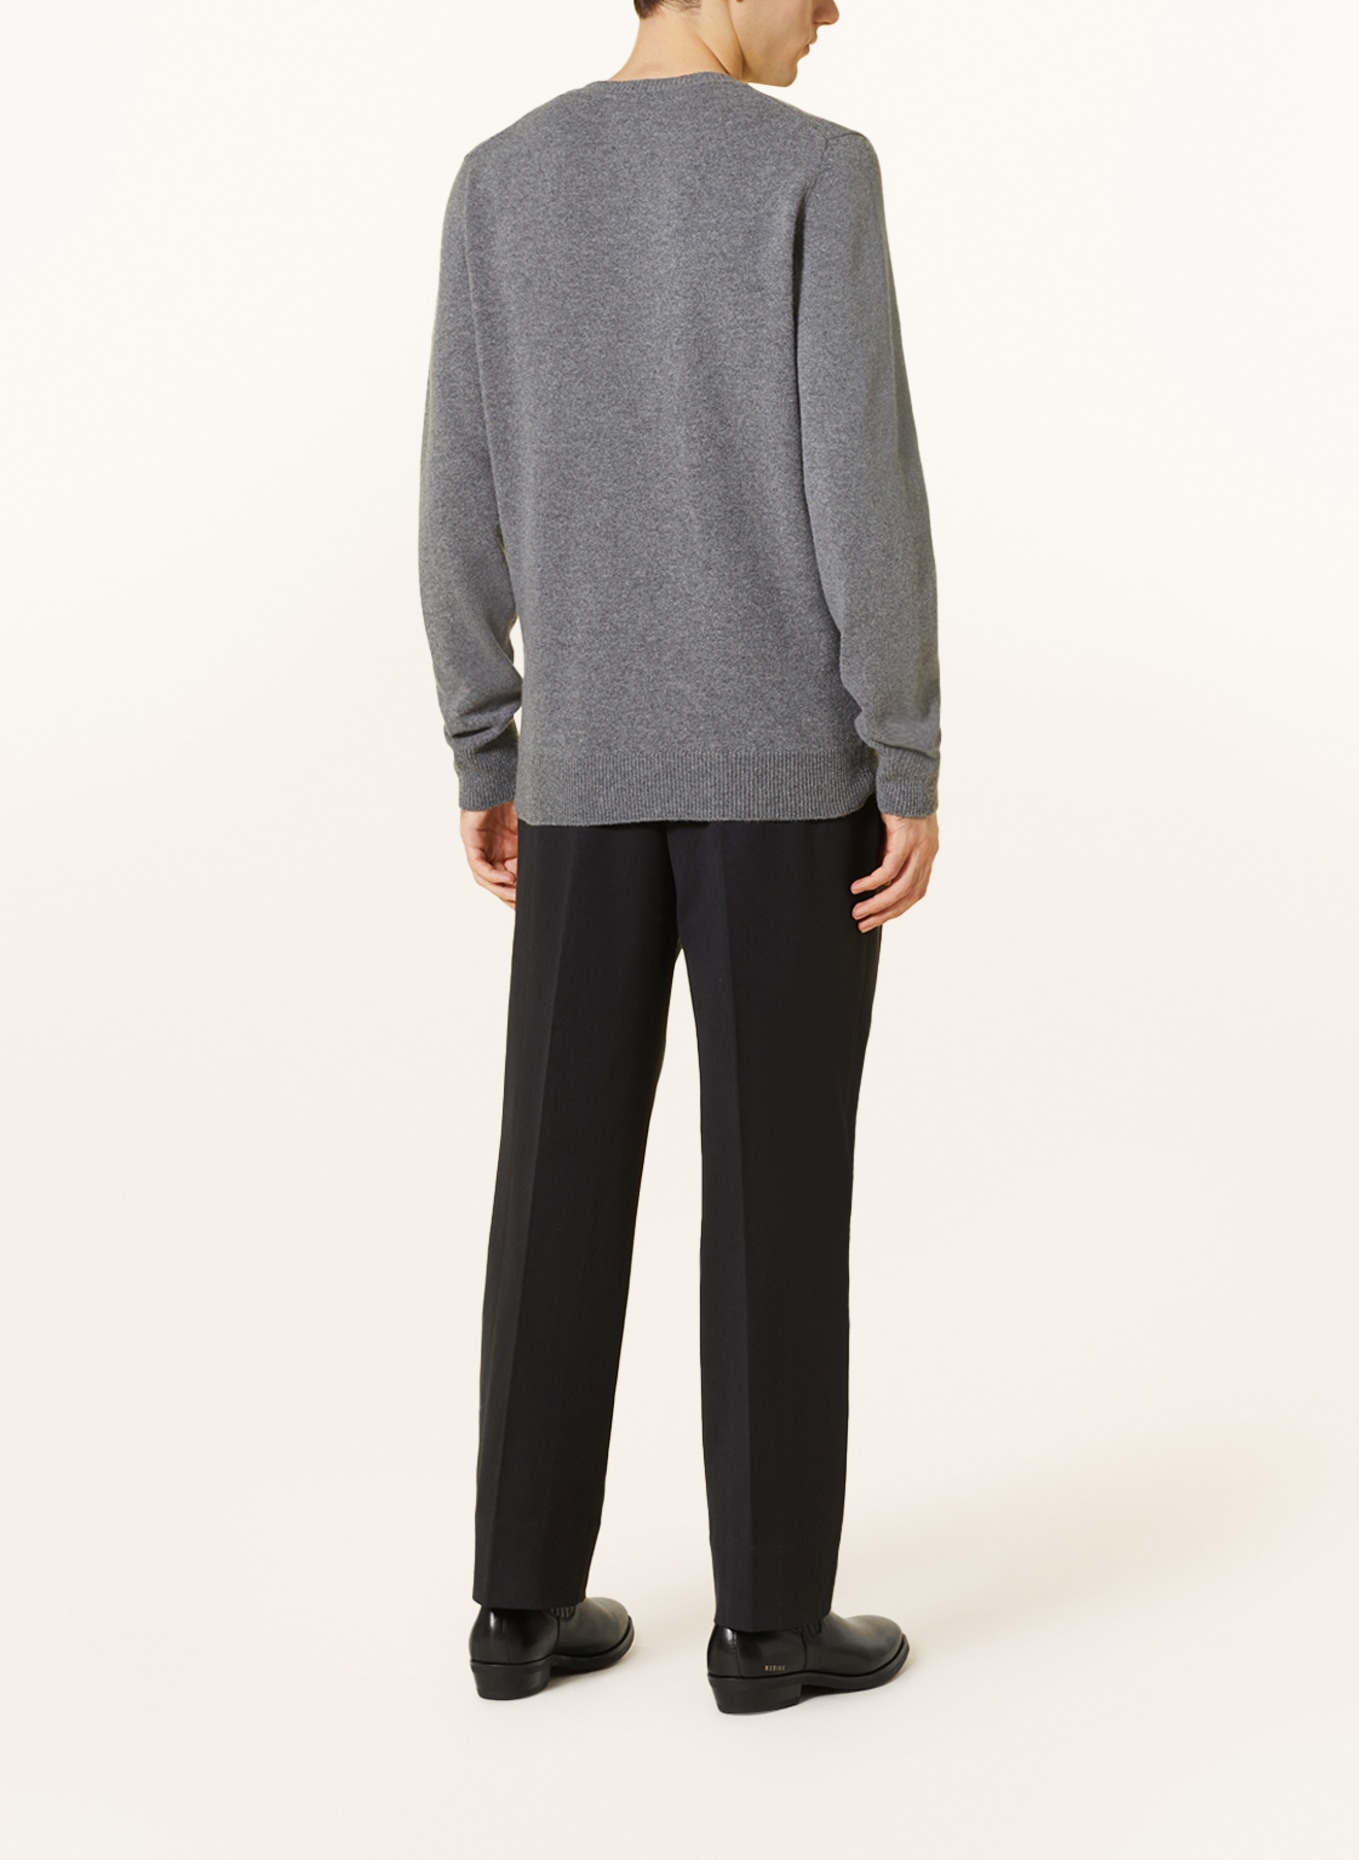 NORSE PROJECTS Sweater SIGFRIED made of merino wool, Color: GRAY (Image 3)